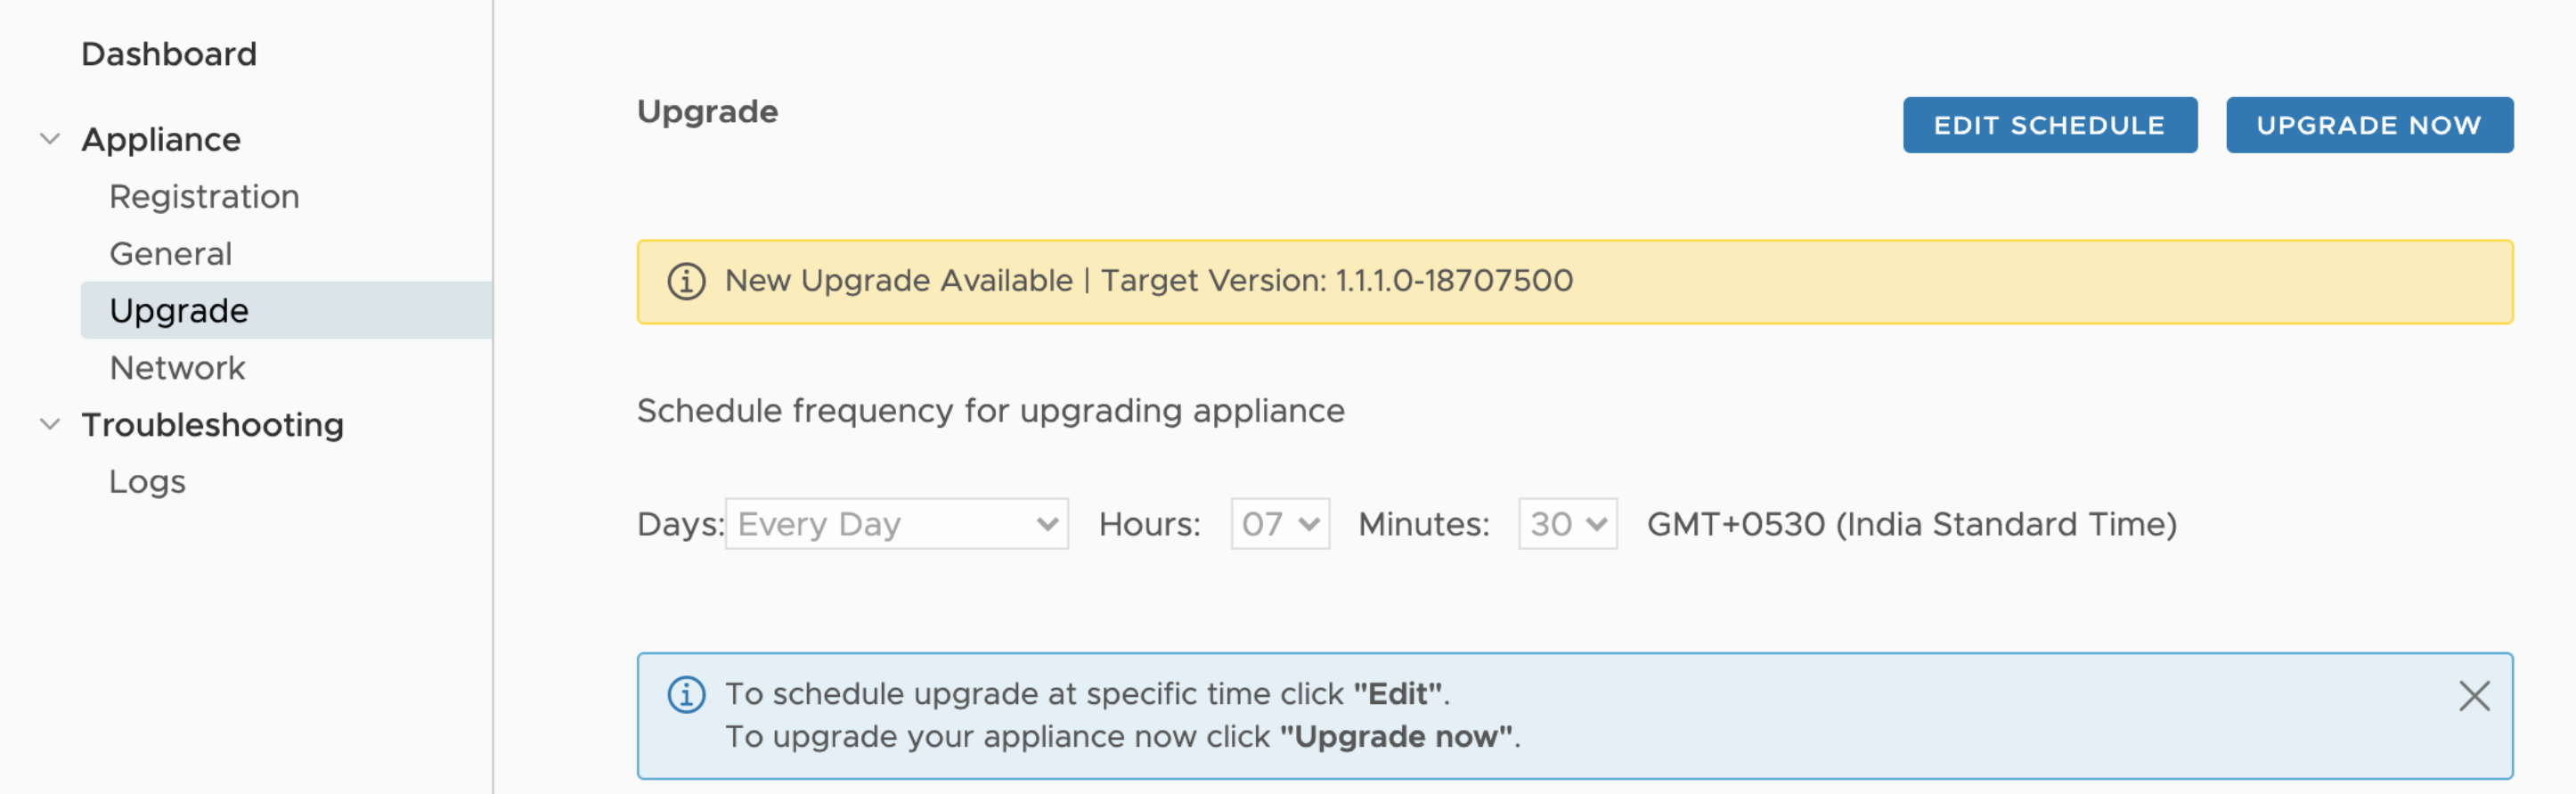 Schedule an upgrade for the appliance.